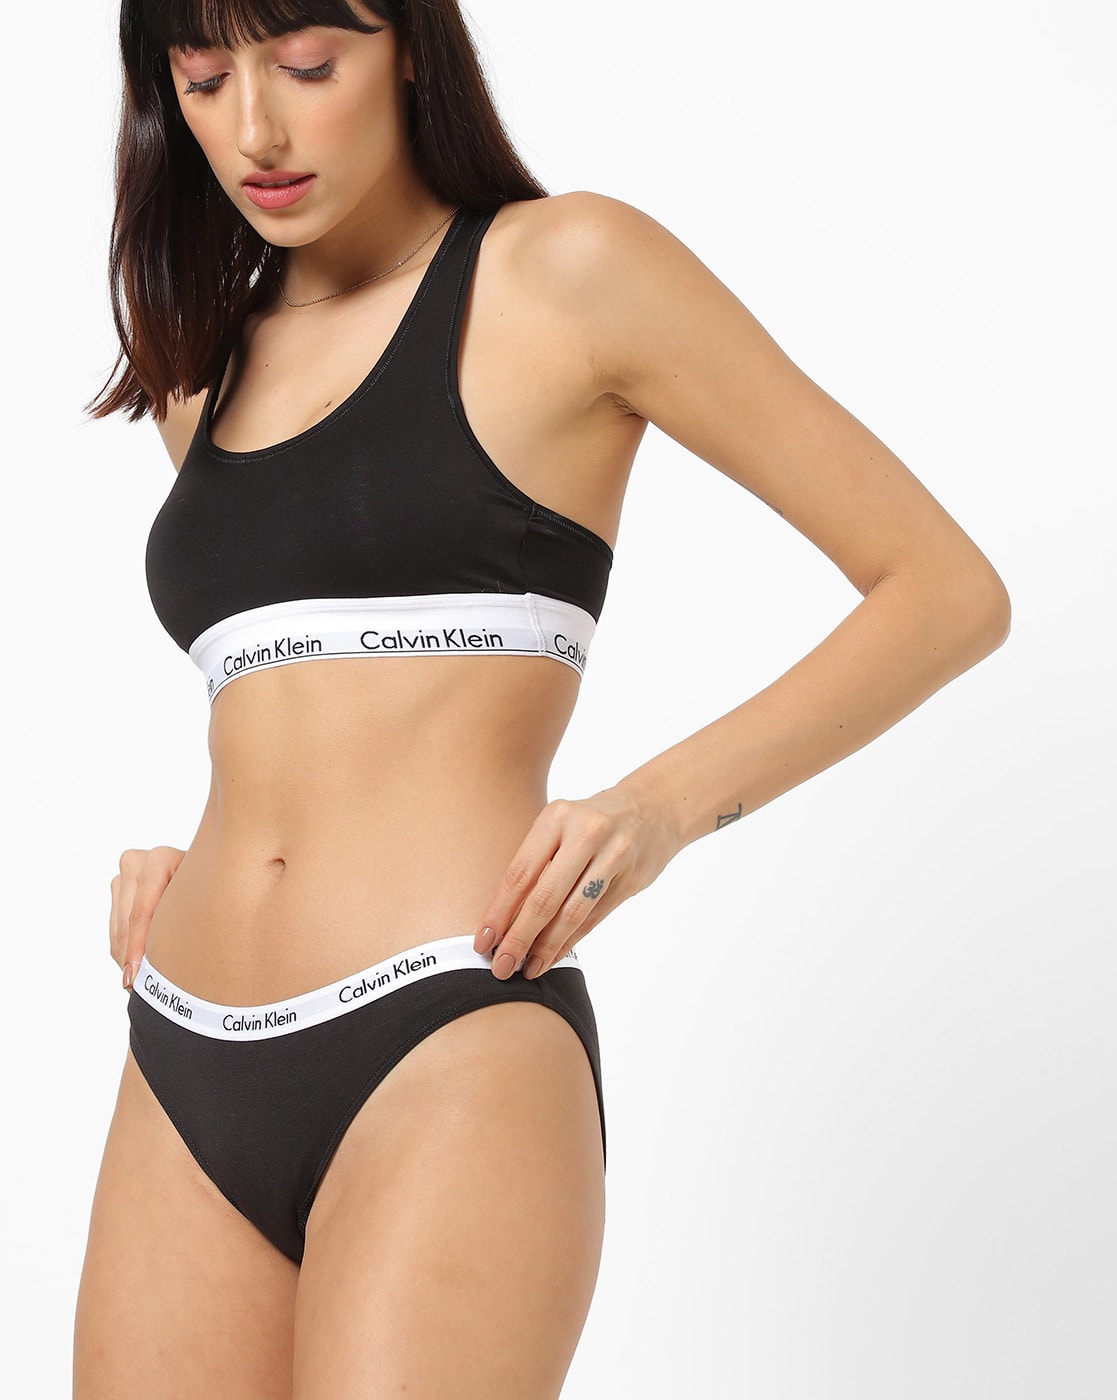 Underpants from Calvin Klein for Women in Black